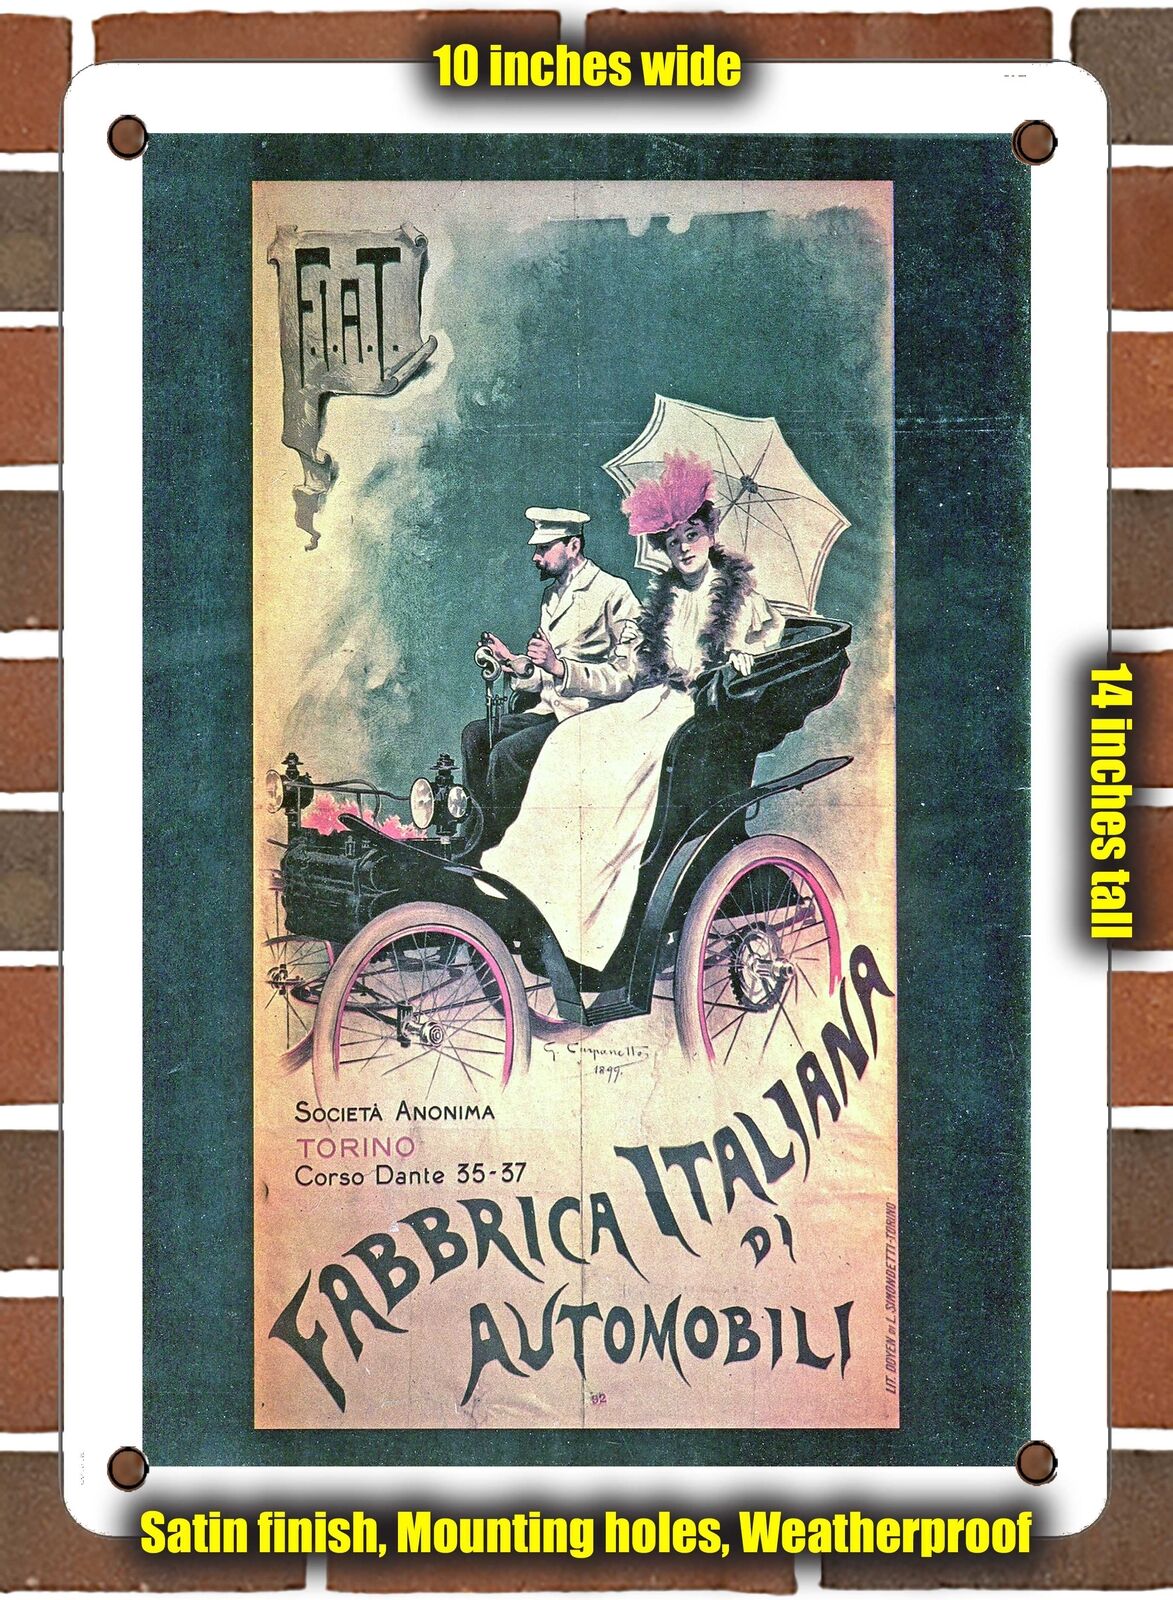 METAL SIGN - 1899 Fiat Italian Automobile Factory - 10x14 Inches